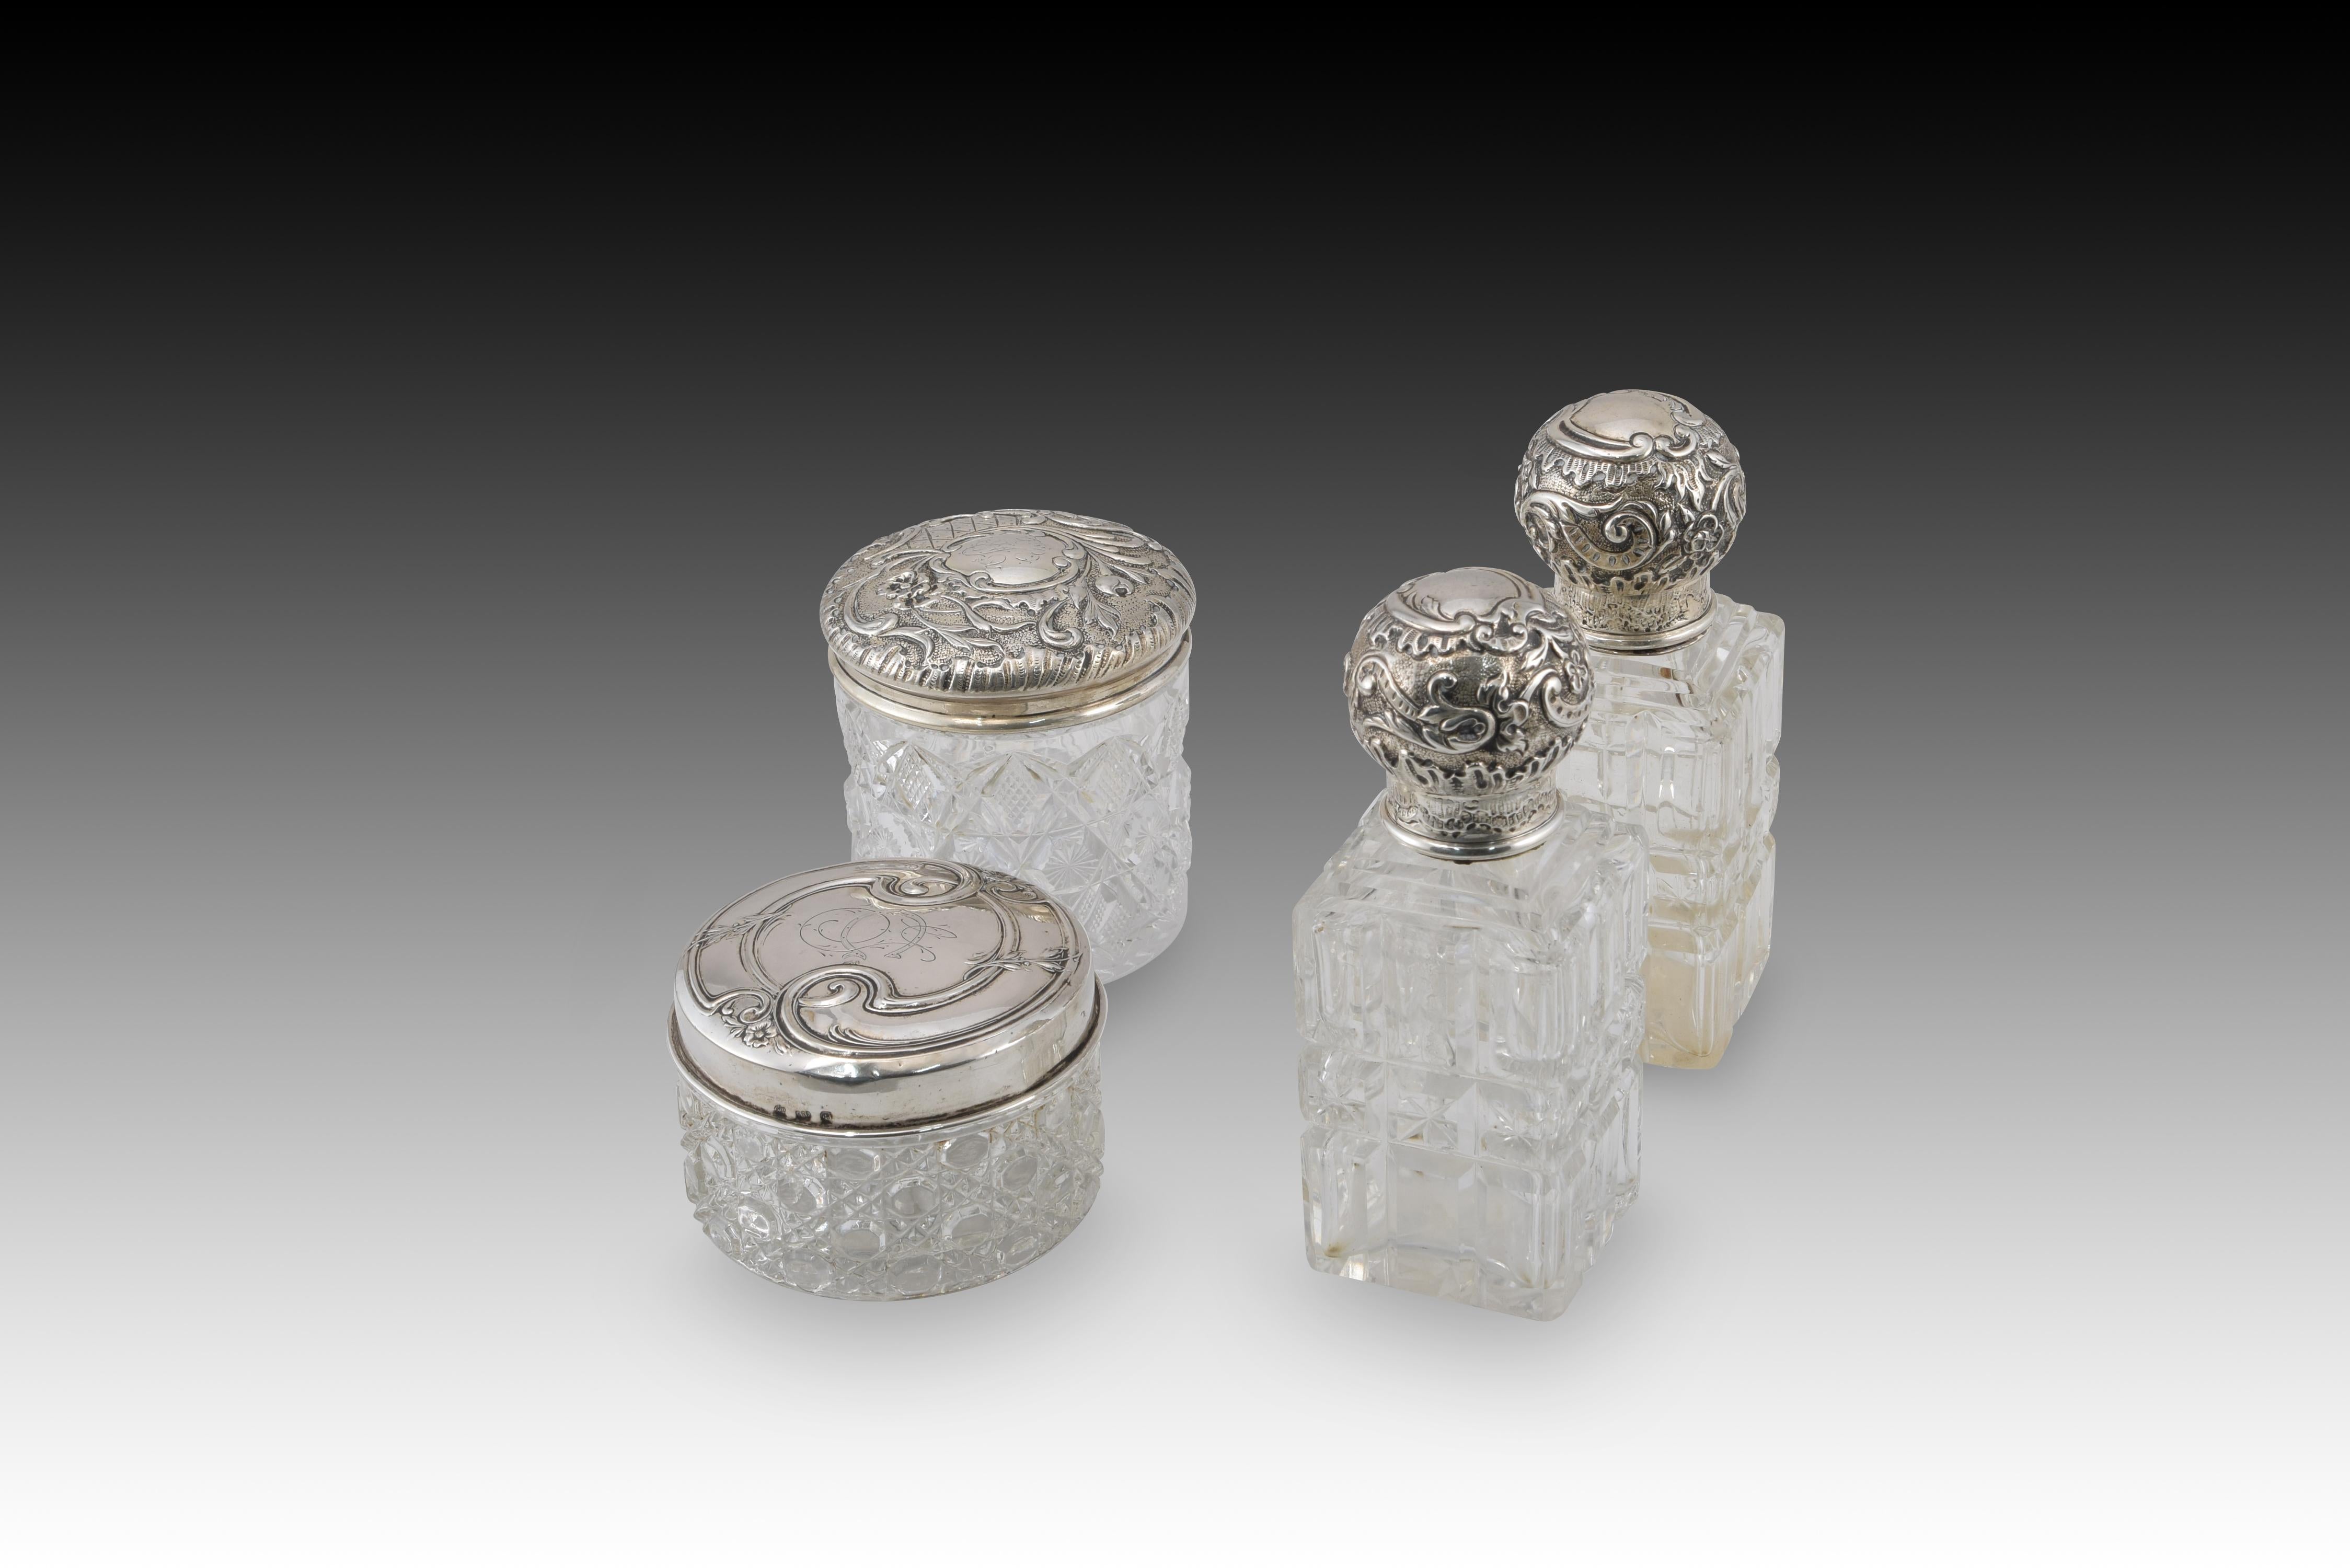 Neoclassical Revival Boudoir jars set. Silver (800, etc.), glass. Spain and others, 20th century For Sale